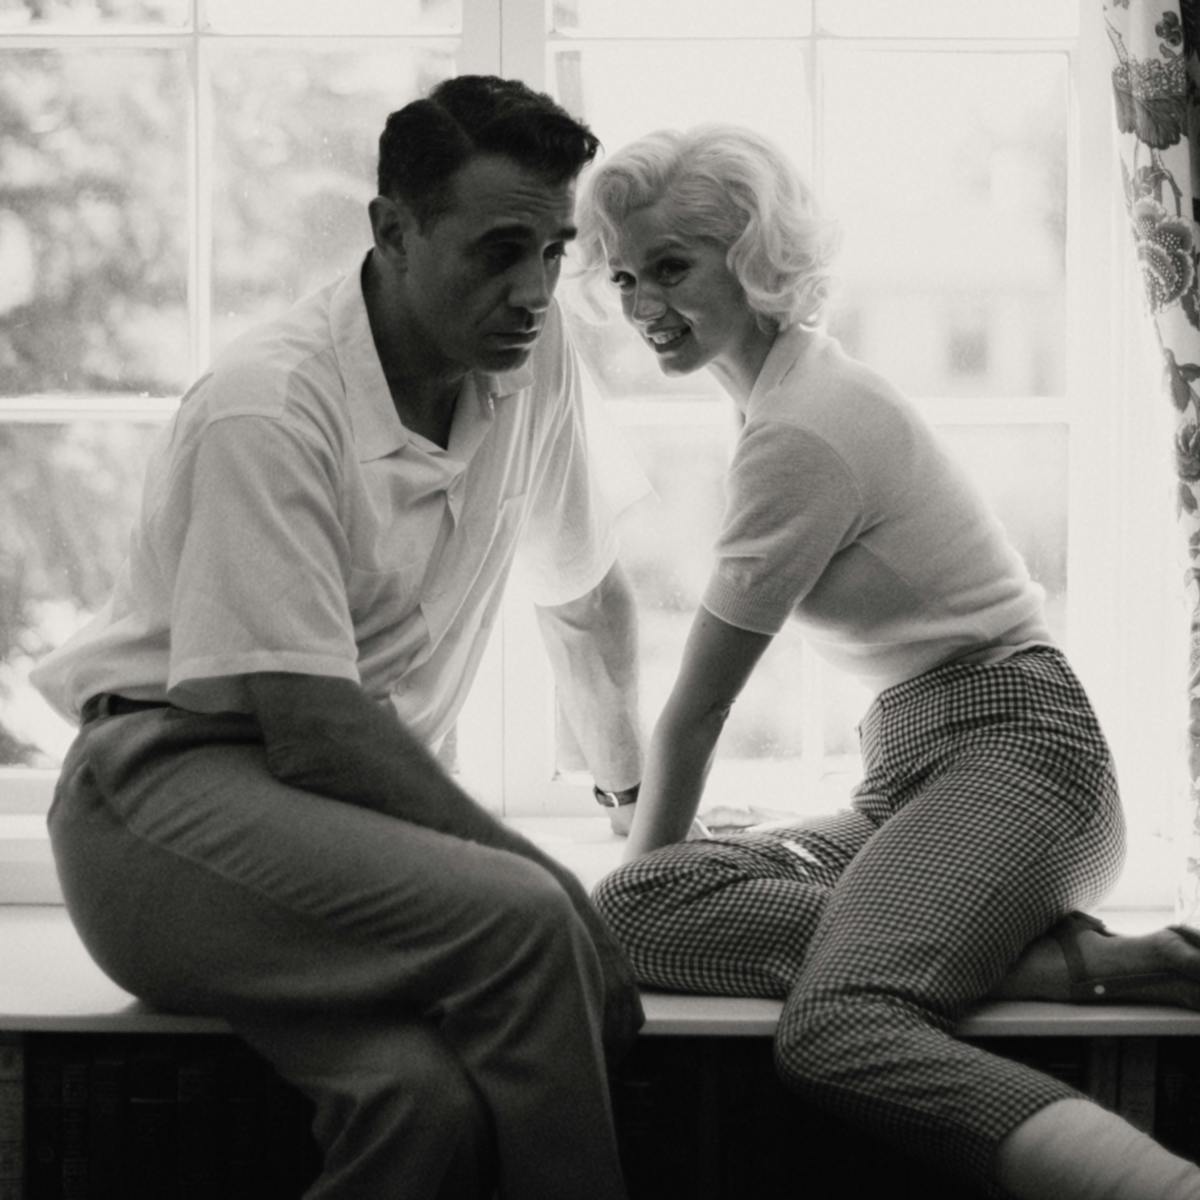 Bobby Cannavale and Marilyn Monroe sit in a window sill together in this black-and-white shot.